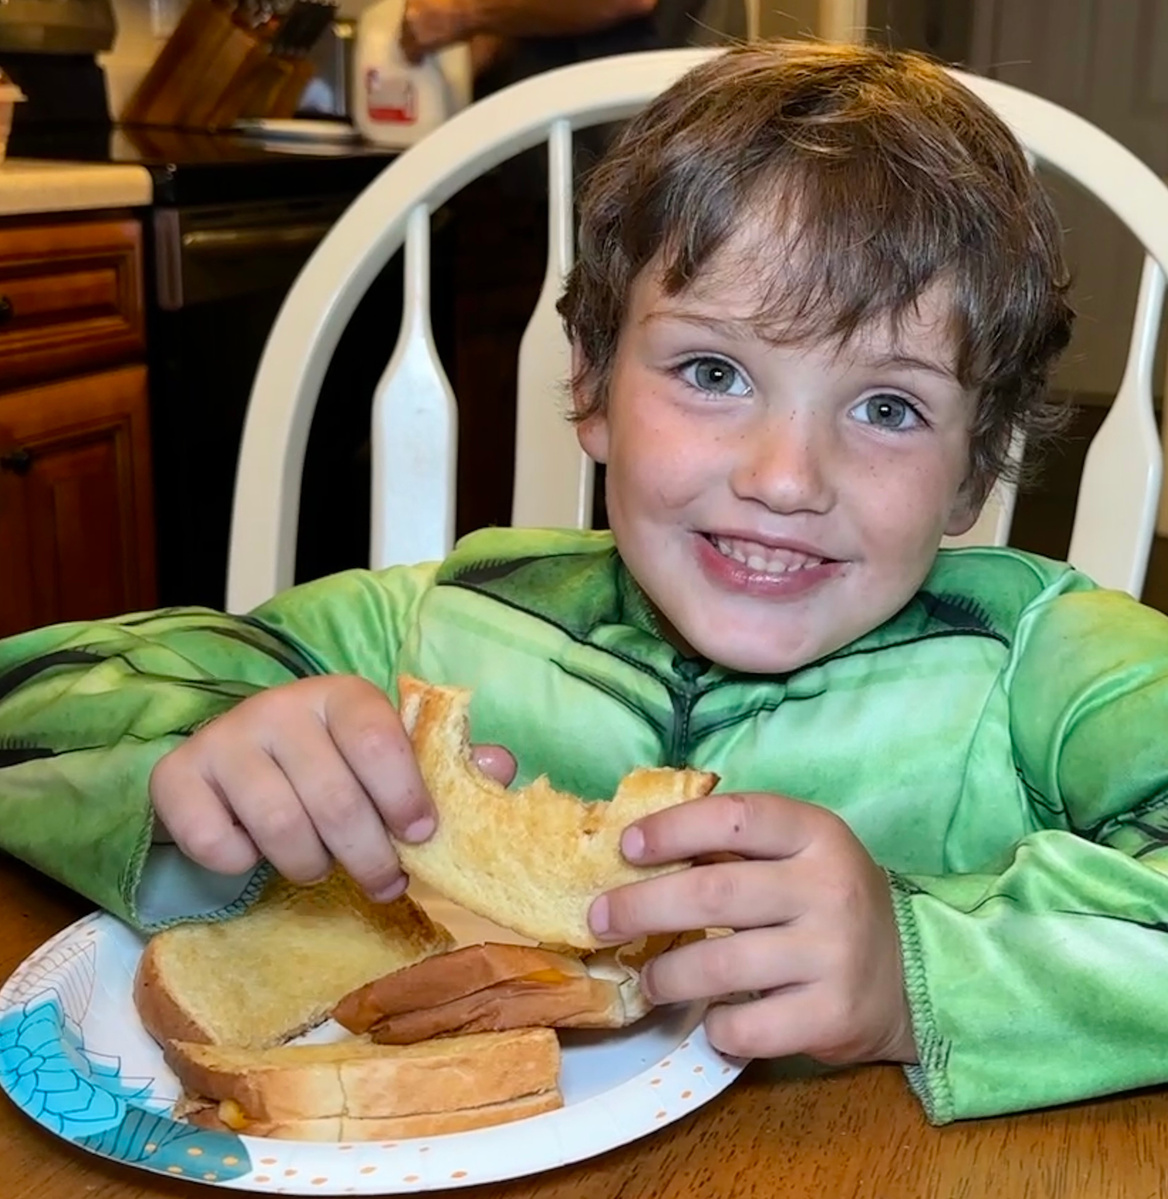 A young boy eats a grilled cheese sandwich while wearing a Hulk costume.